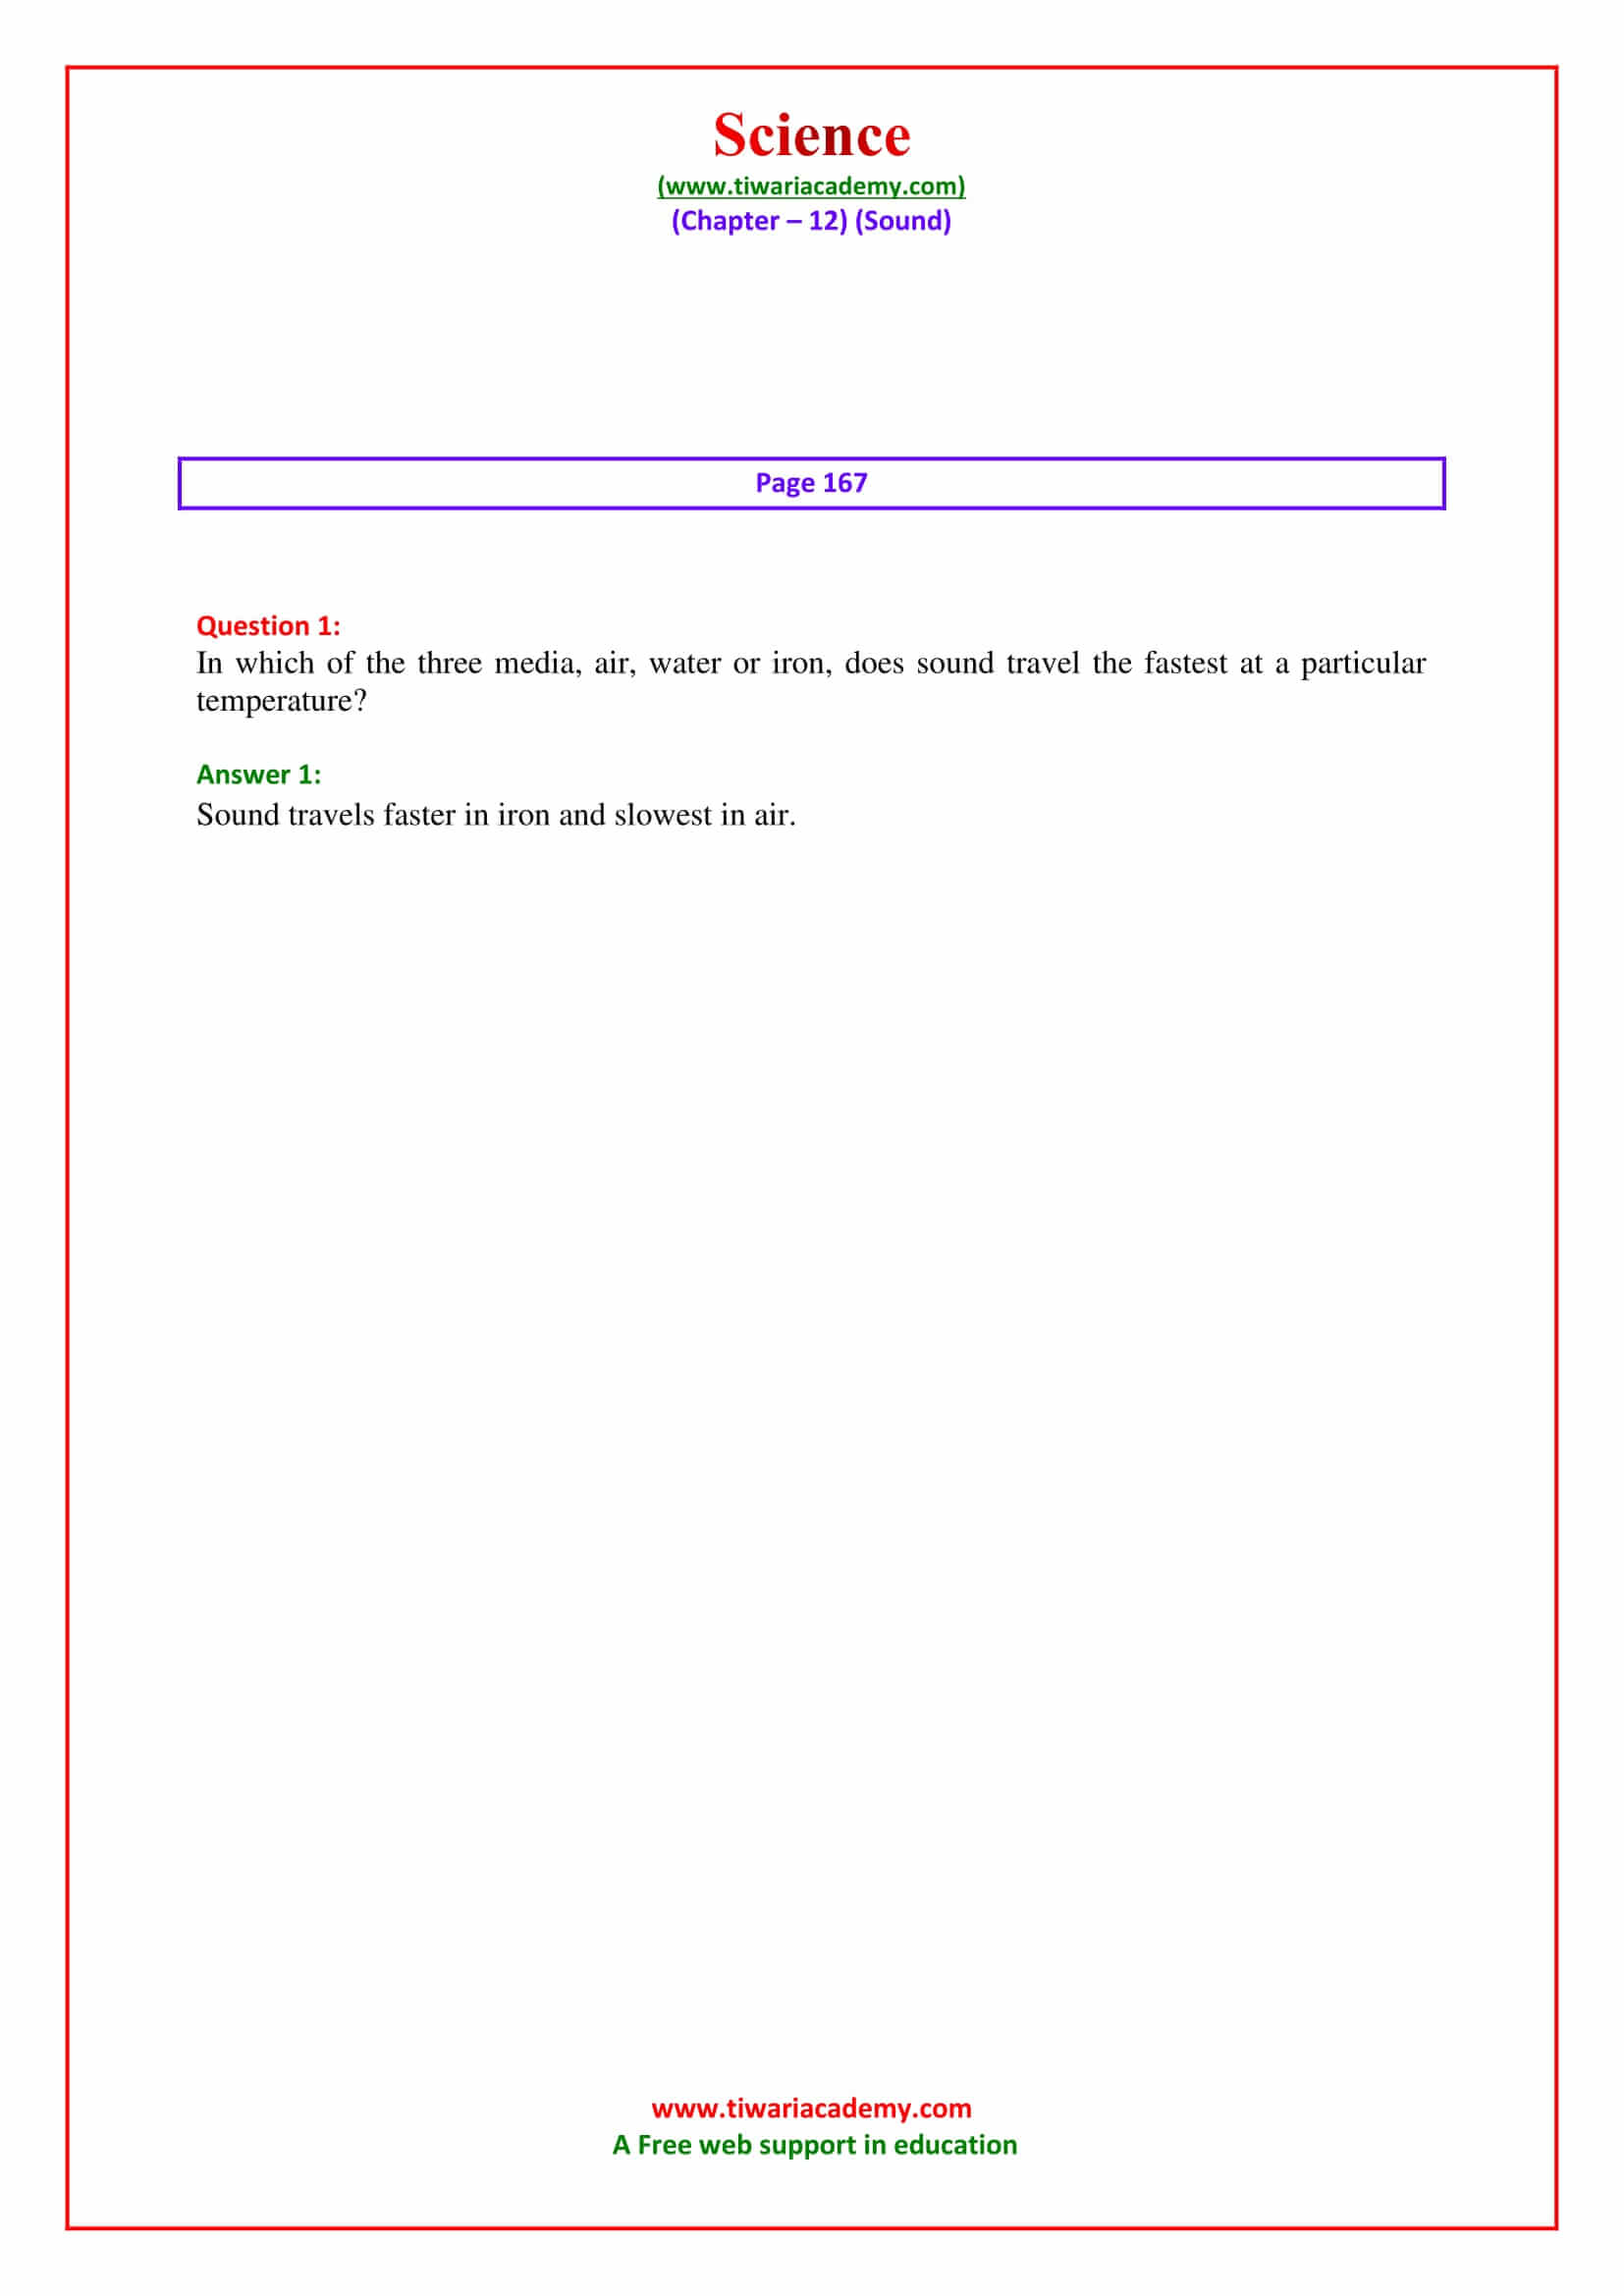 NCERT Solutions for Class 9 Science Chapter 12 Sound page 167